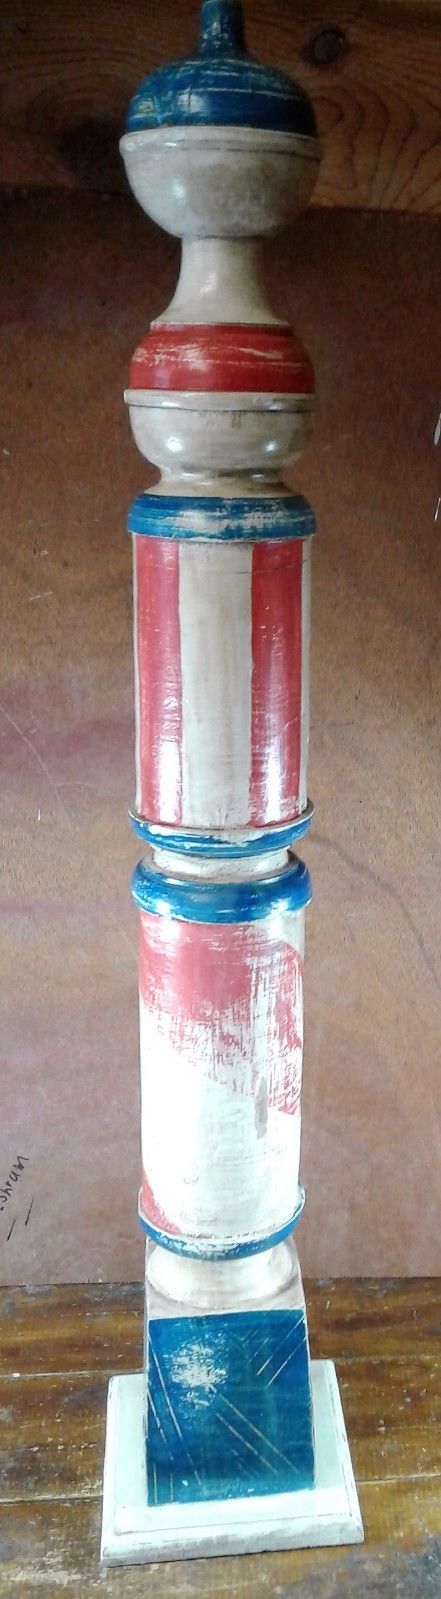 Barber Pole Wooden Classic Red White Blue Square Base Barber Shop Pole